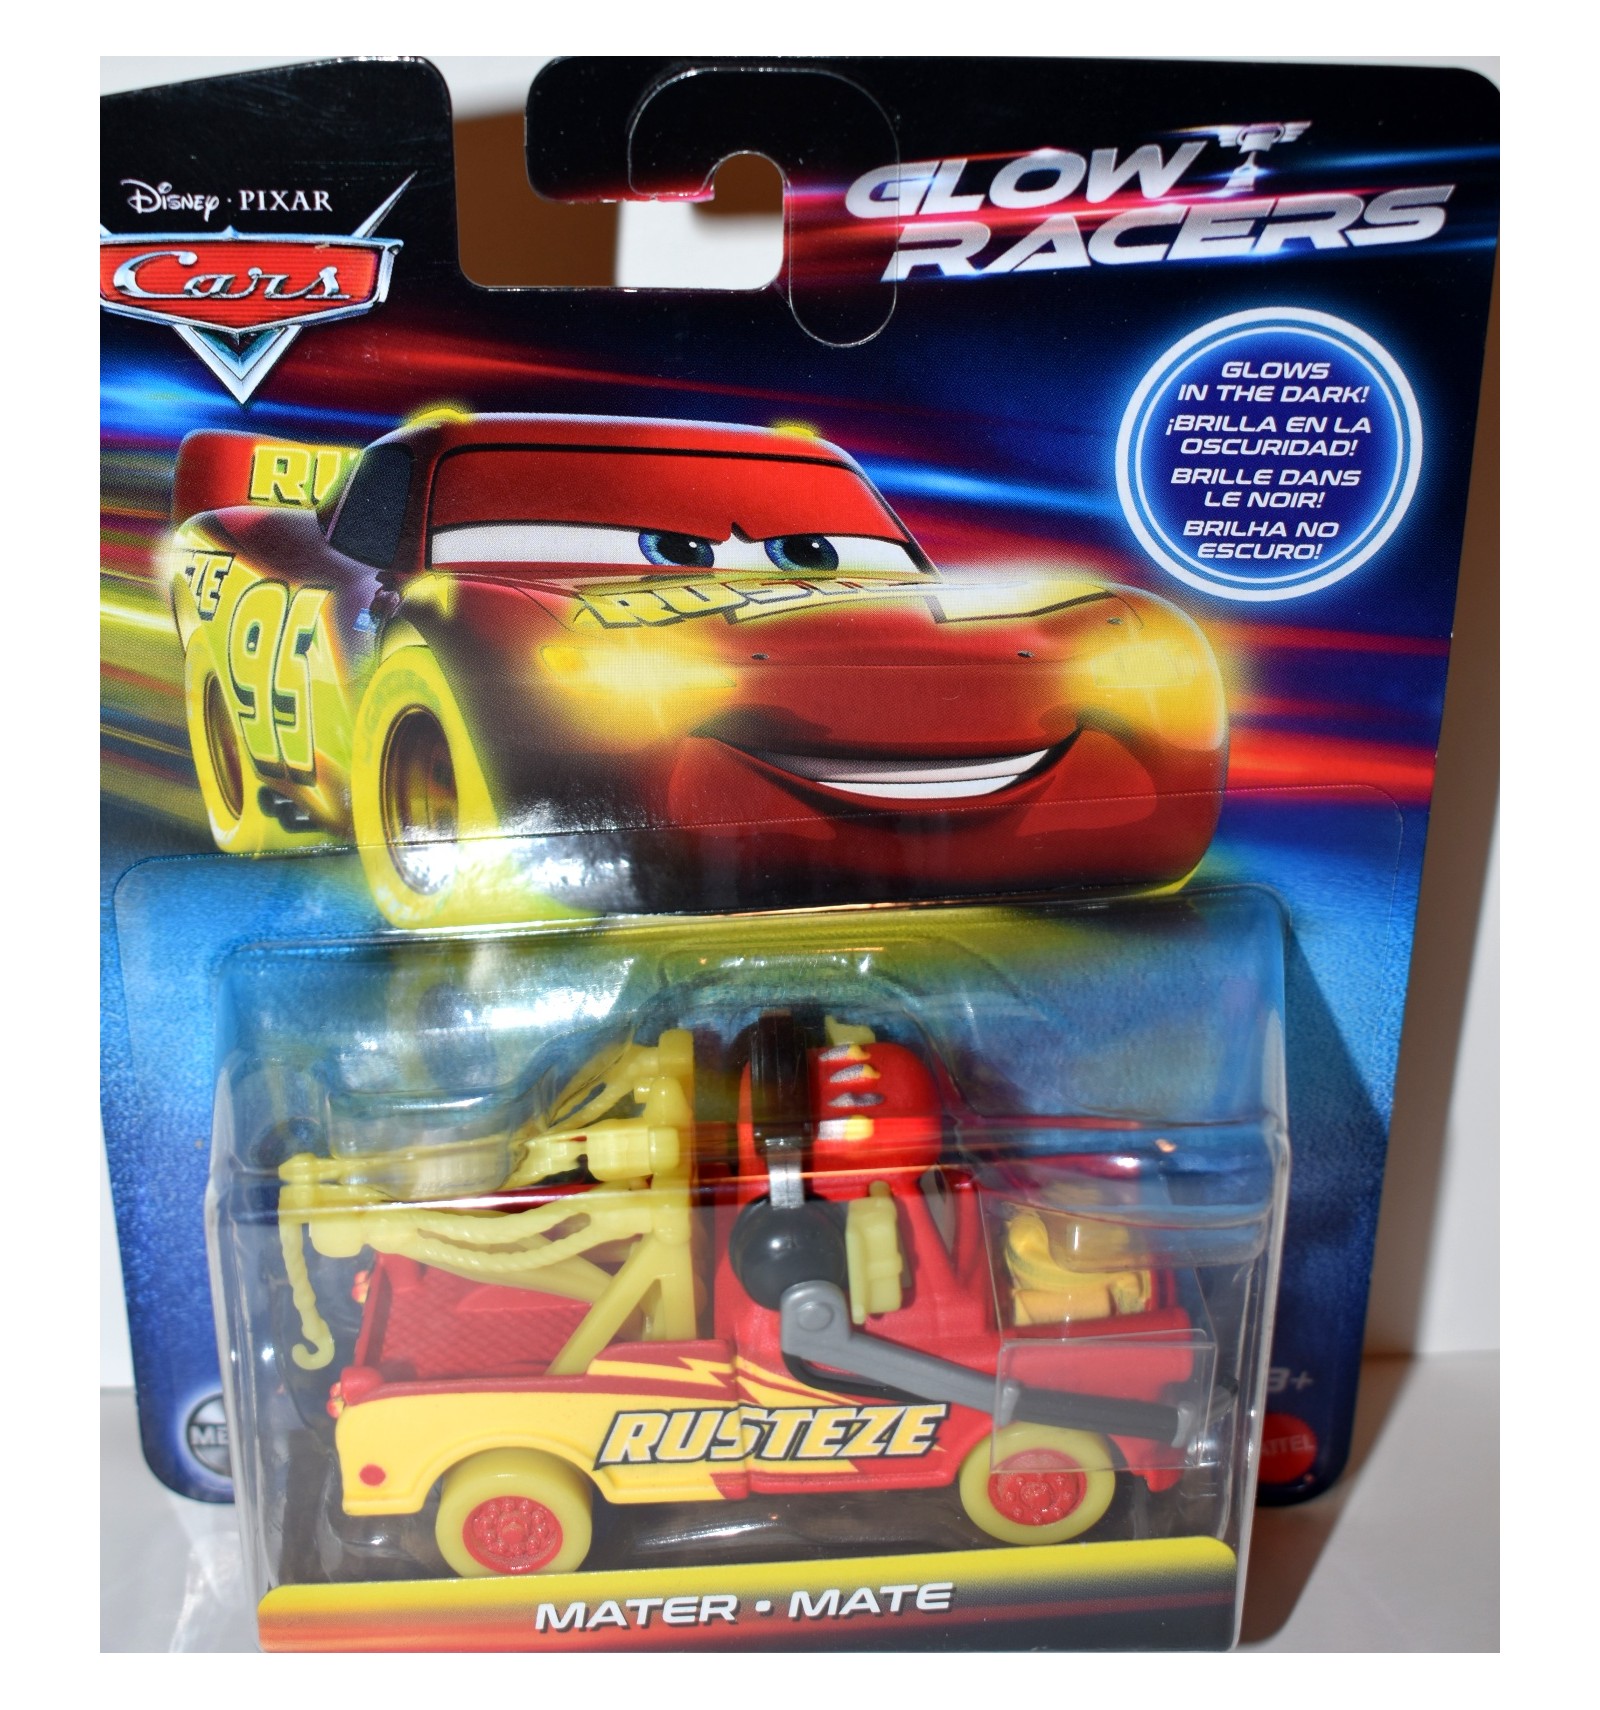 Disney Cars - Glow Racers - Mater the Tow Truck - Global Diecast Direct